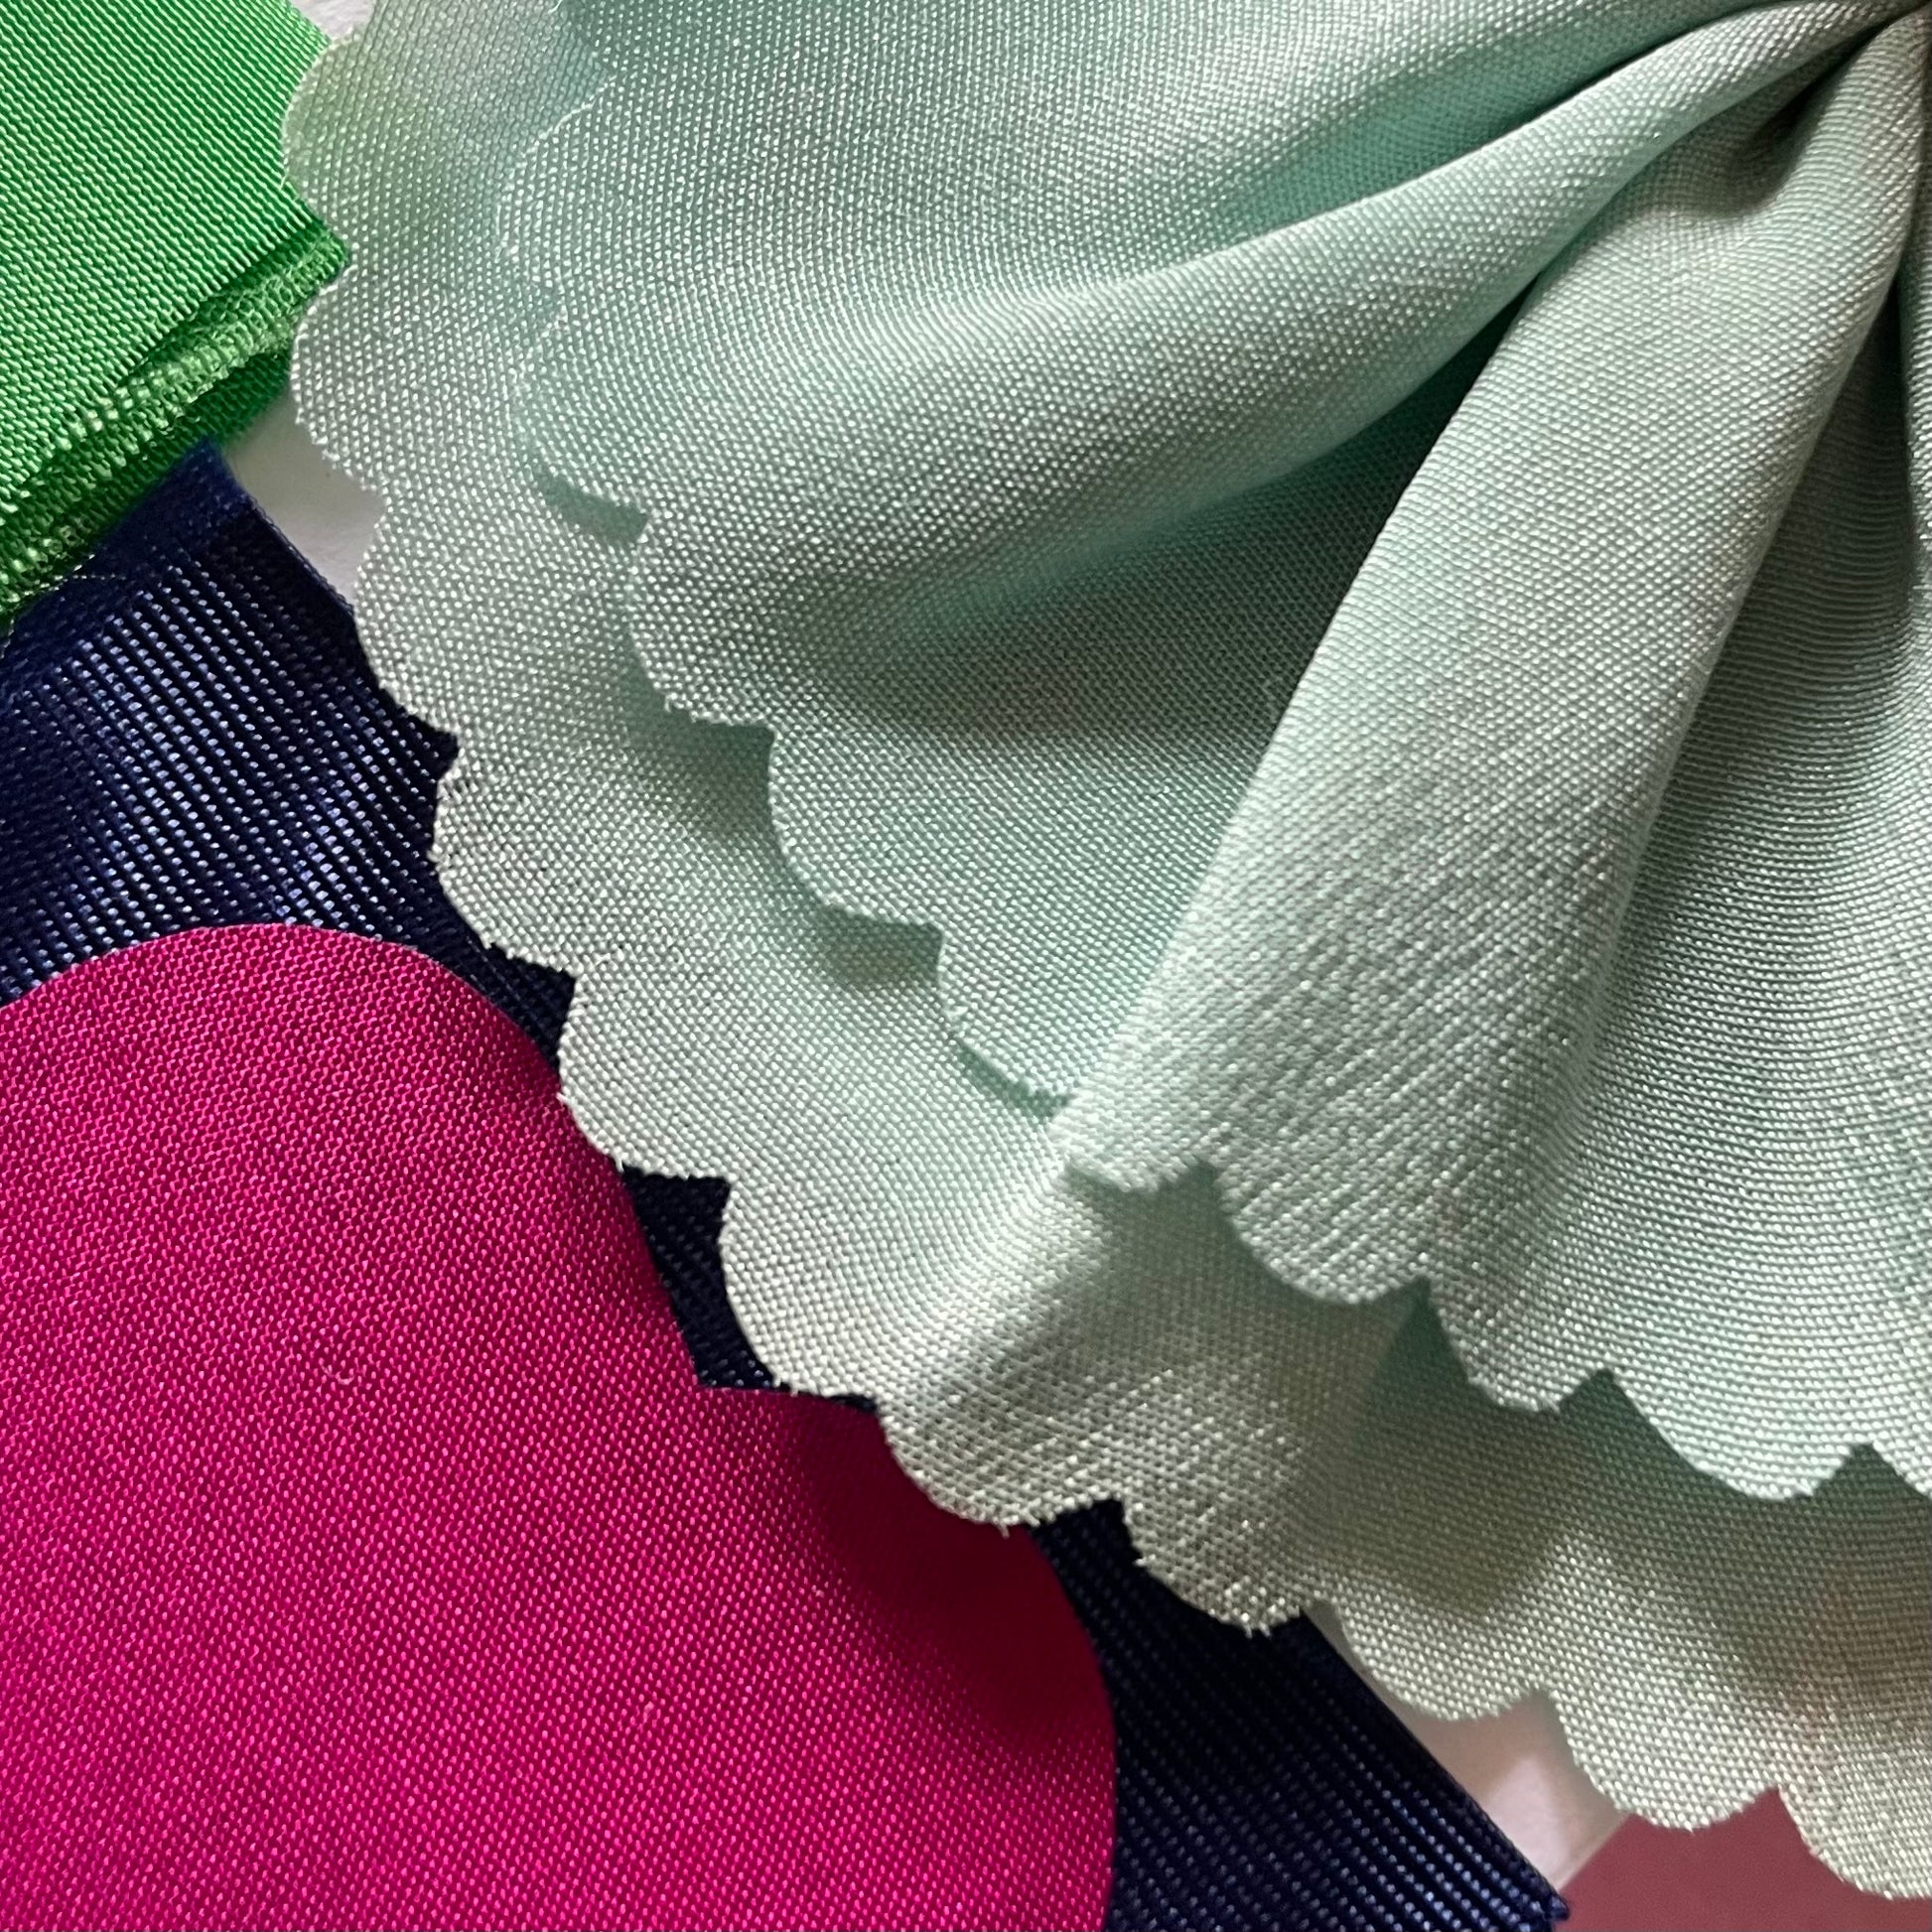 Close-up of fabrics used in the applique on the charm artworks. Lilac, hot pink, navy blue and the corner of green fabric can be seen.